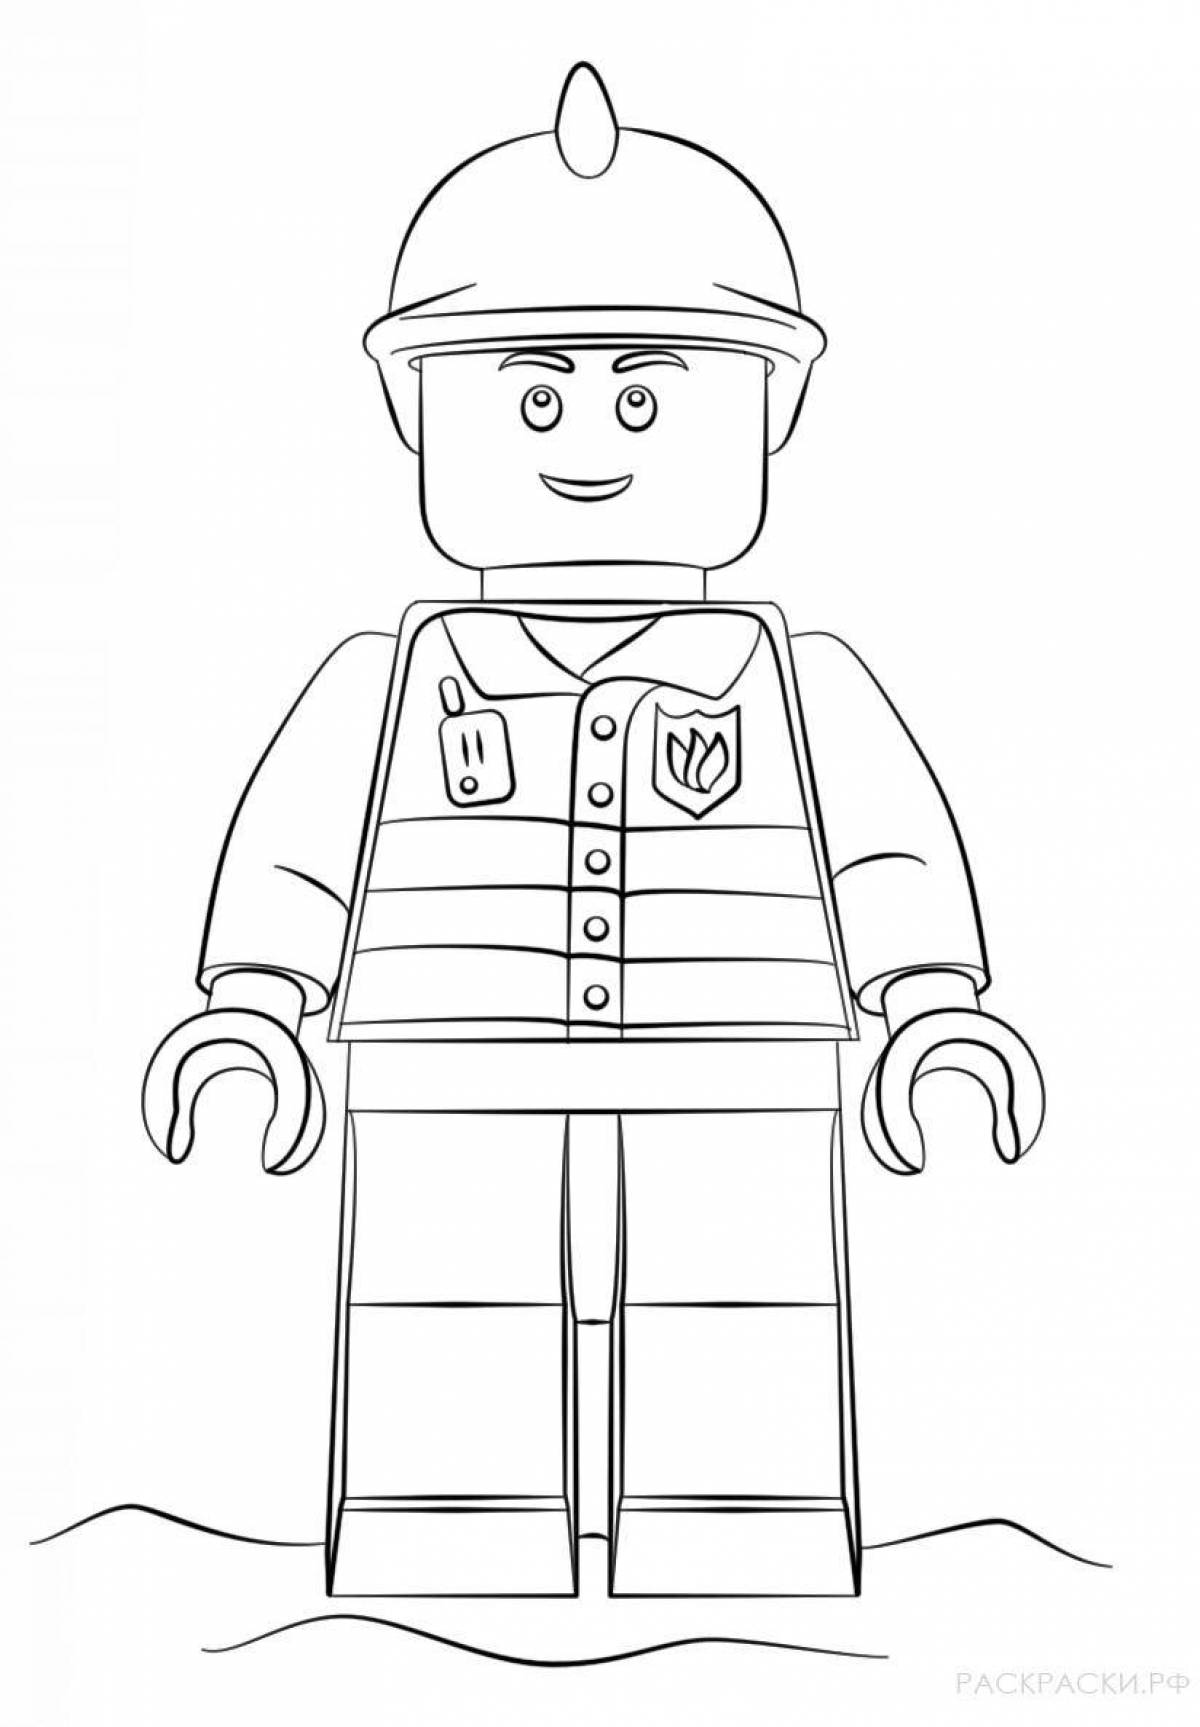 Bright toy soldiers lego coloring